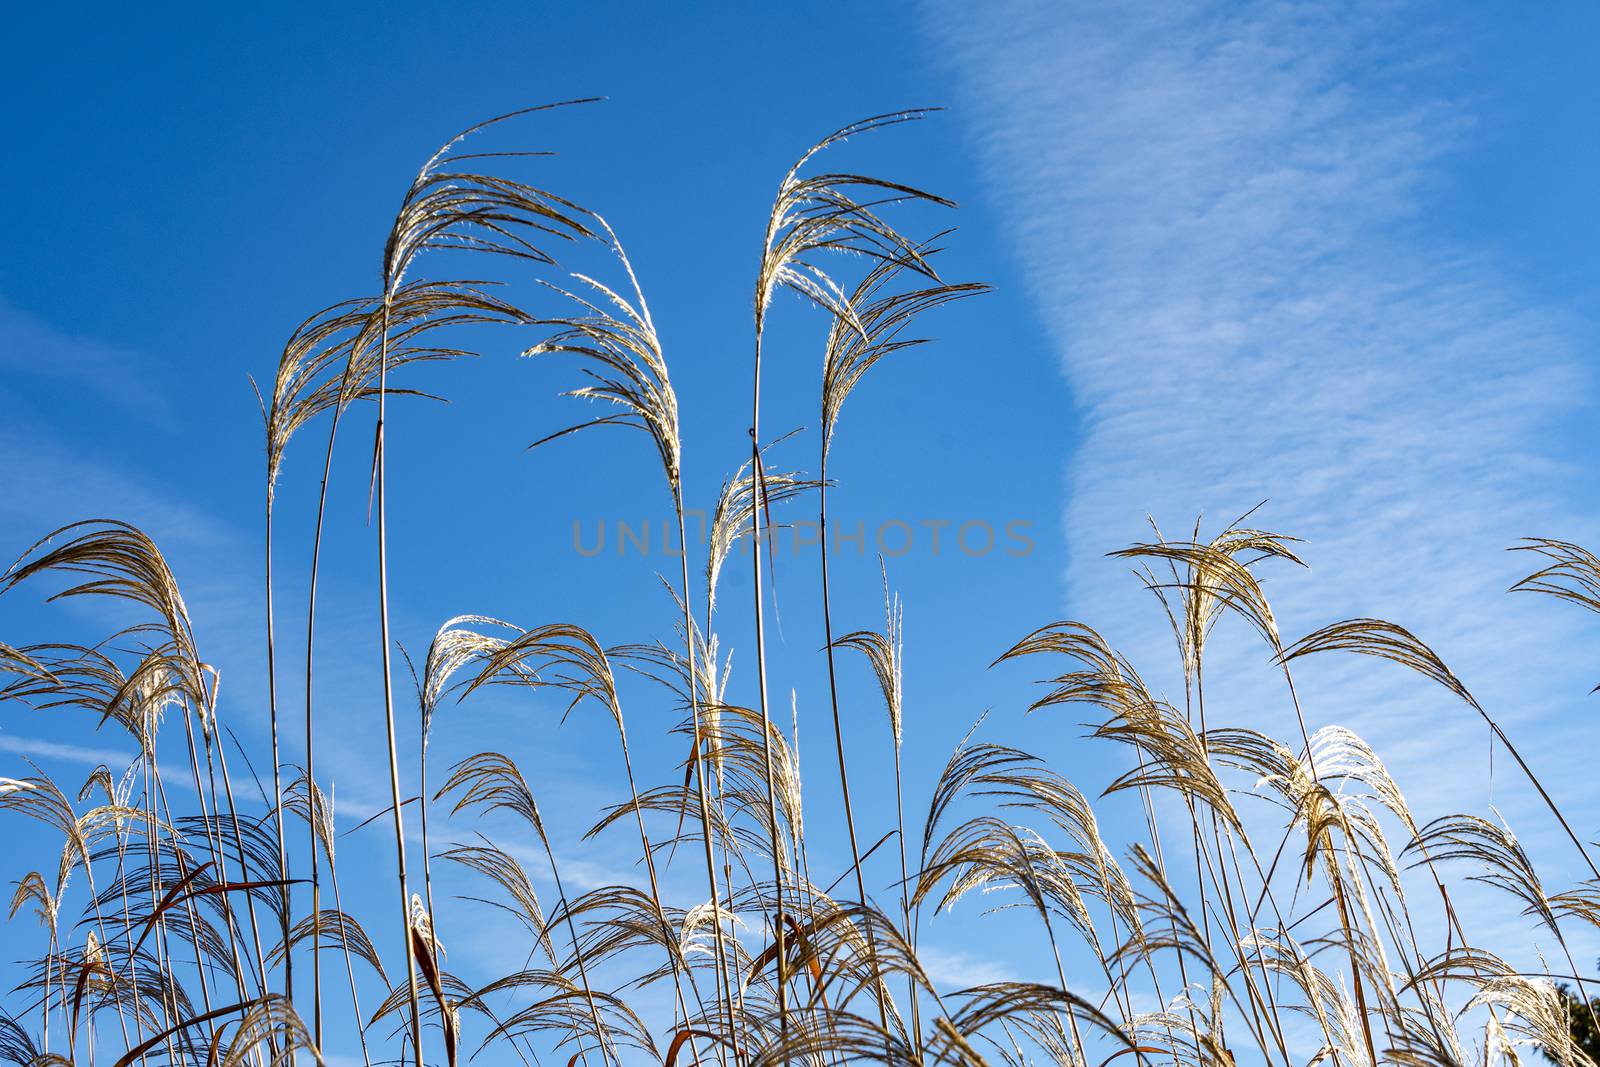 Feather grass has spread its panicles in the wind against a blue by ben44